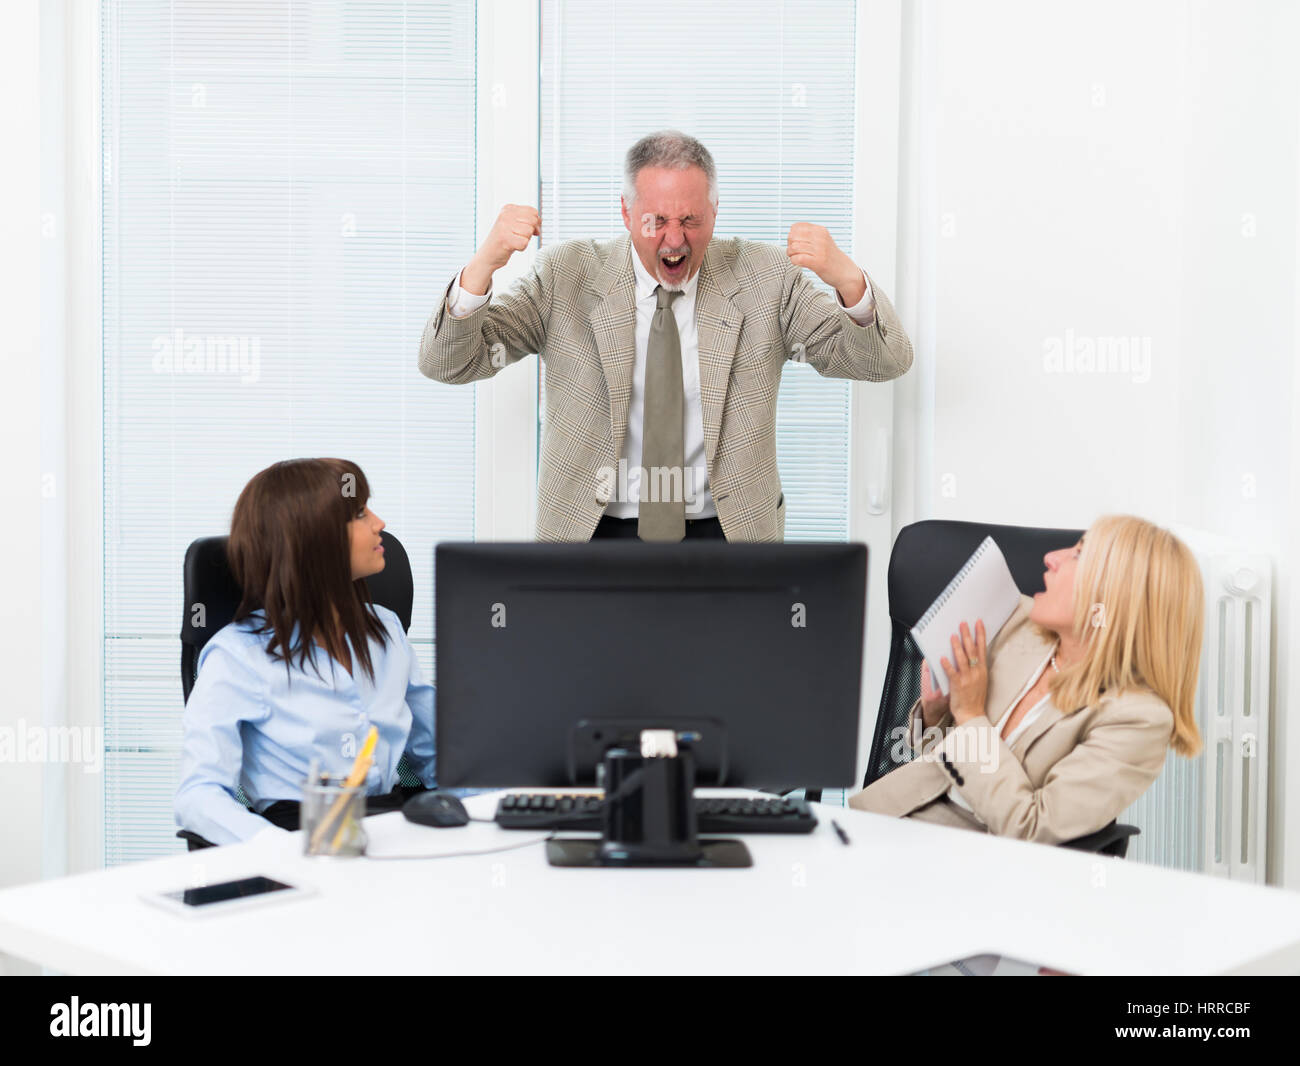 Businessman shouting at his employees Stock Photo